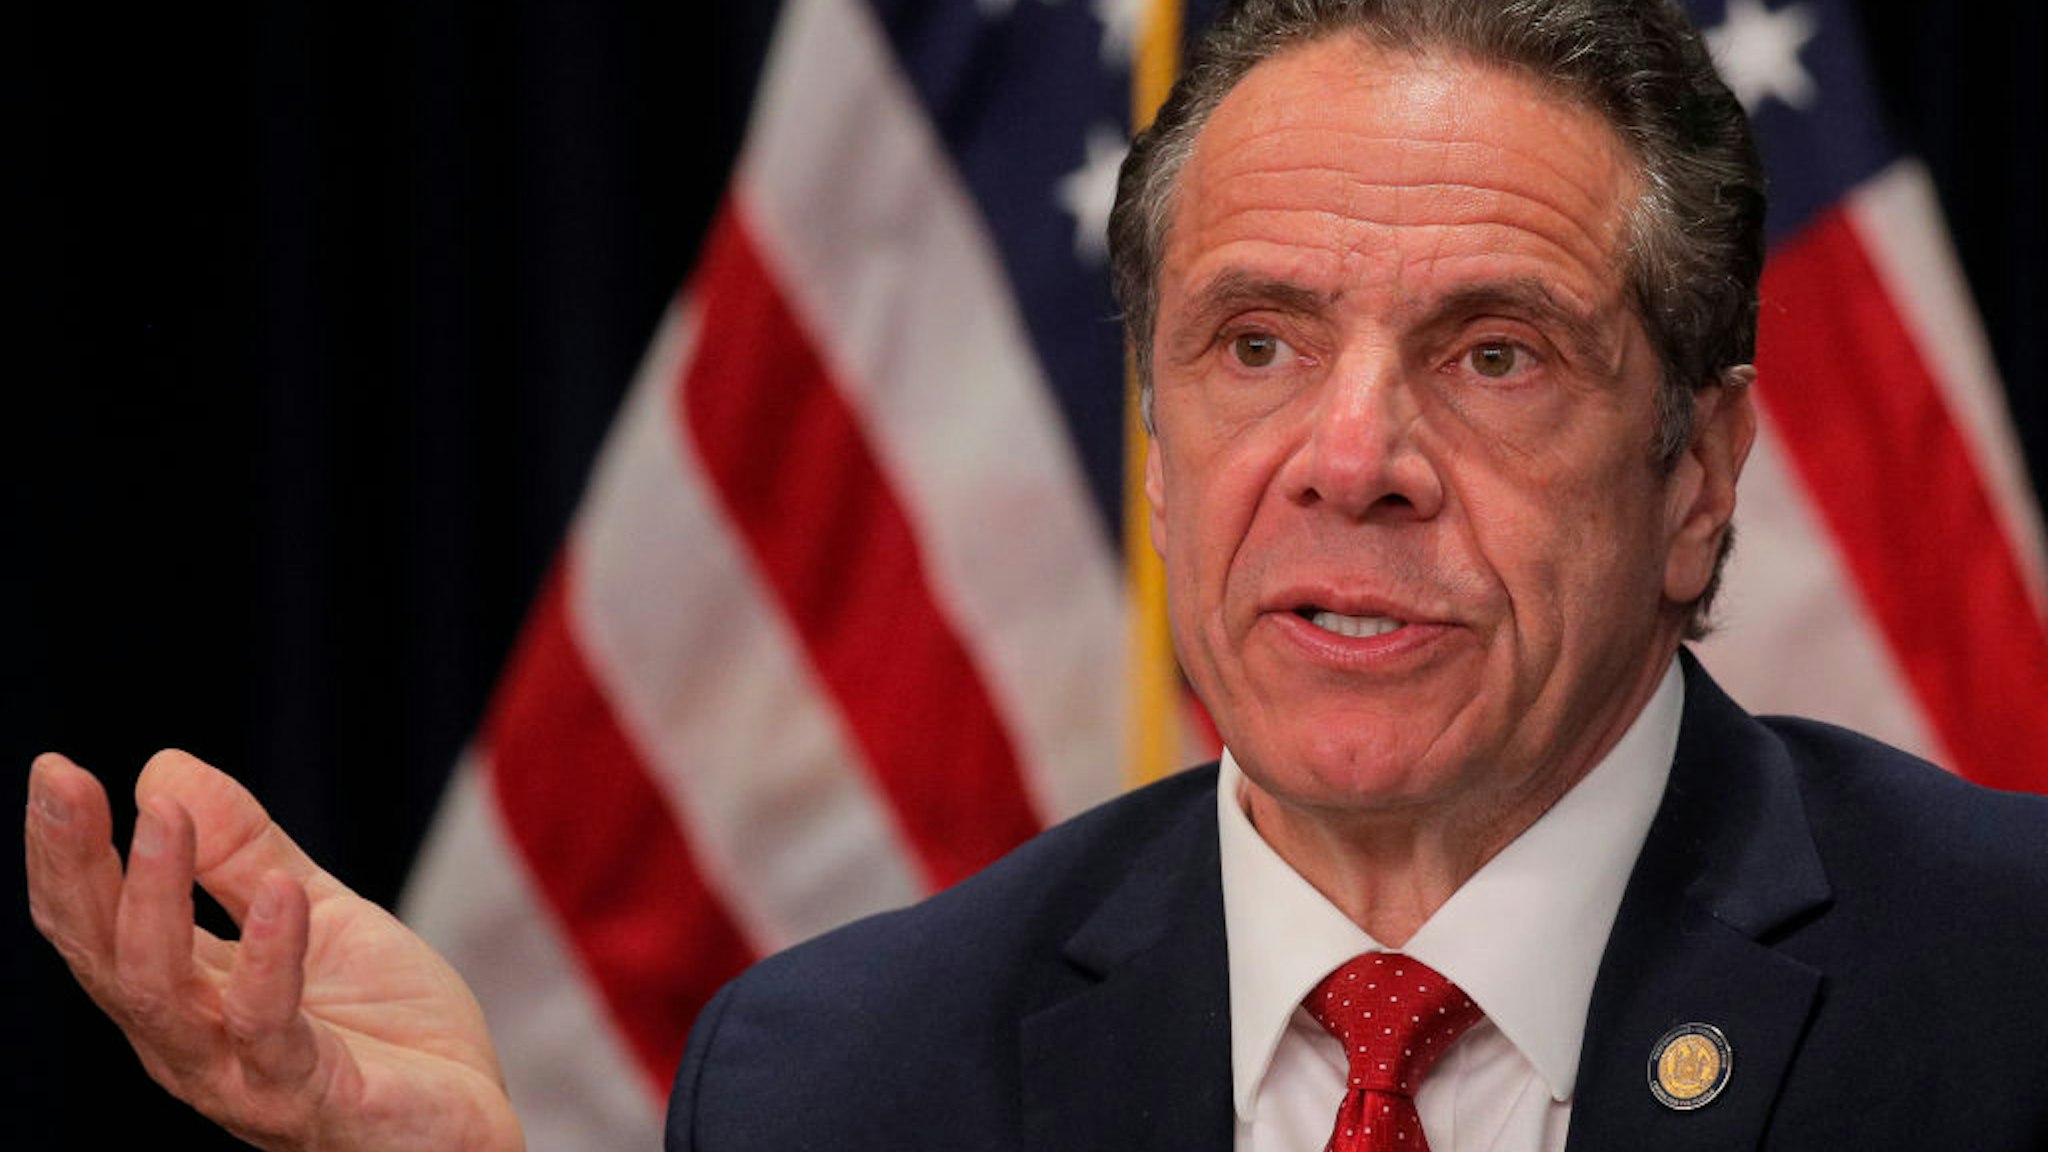 New York Governor Andrew Cuomo speaks during a news conference at his office on March 24, 2021 in New York City.